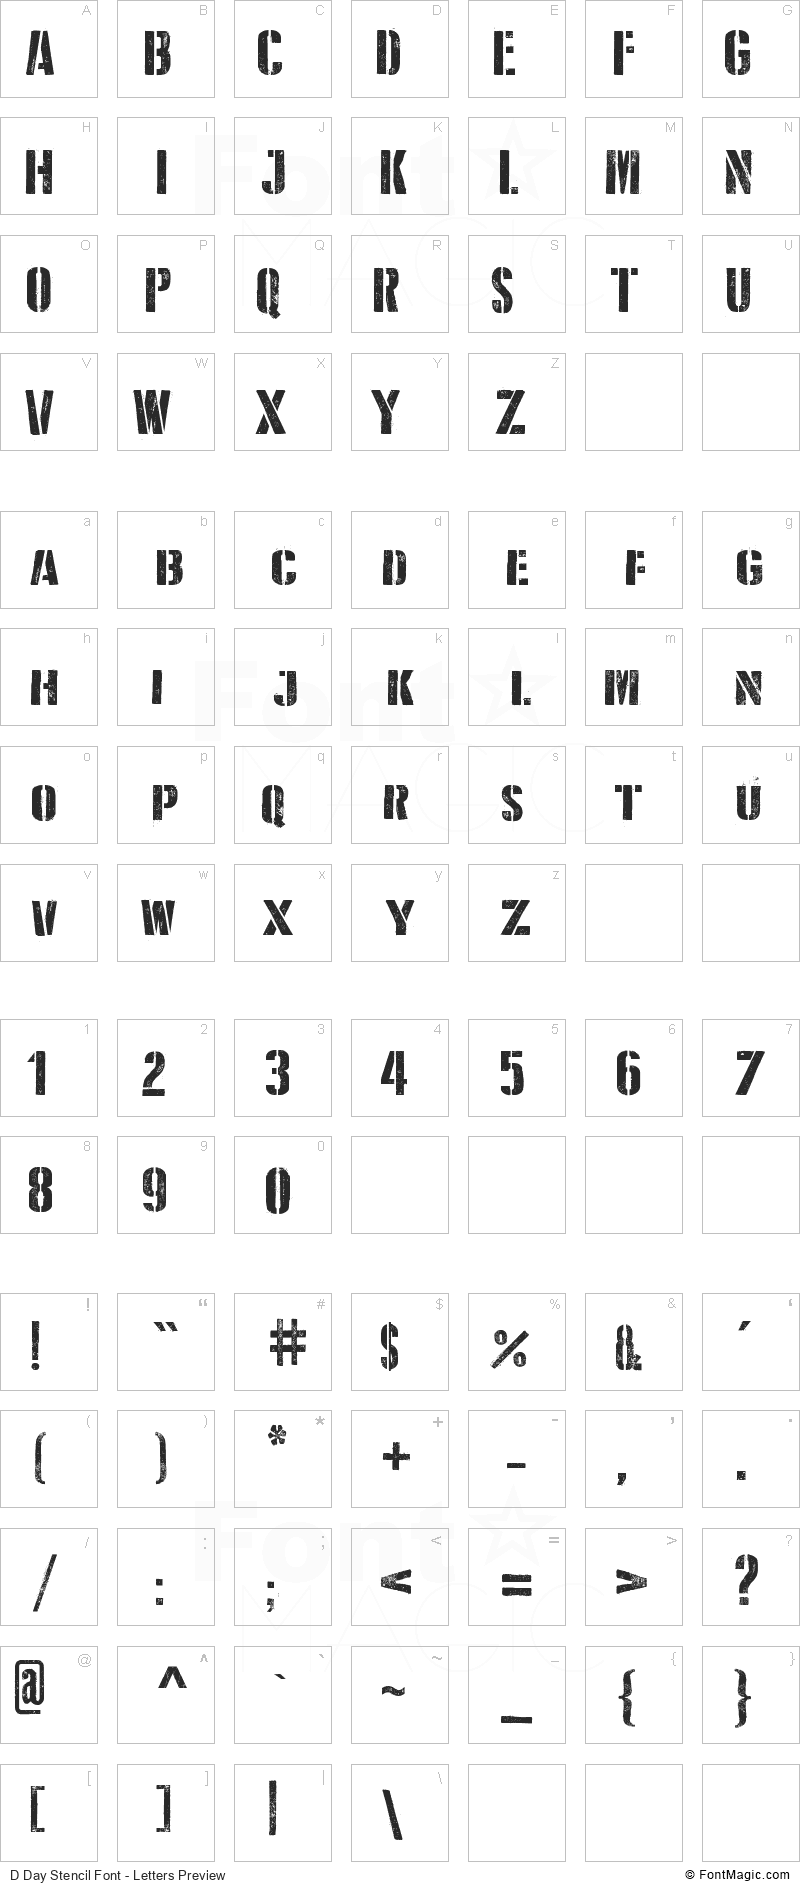 D Day Stencil Font - All Latters Preview Chart